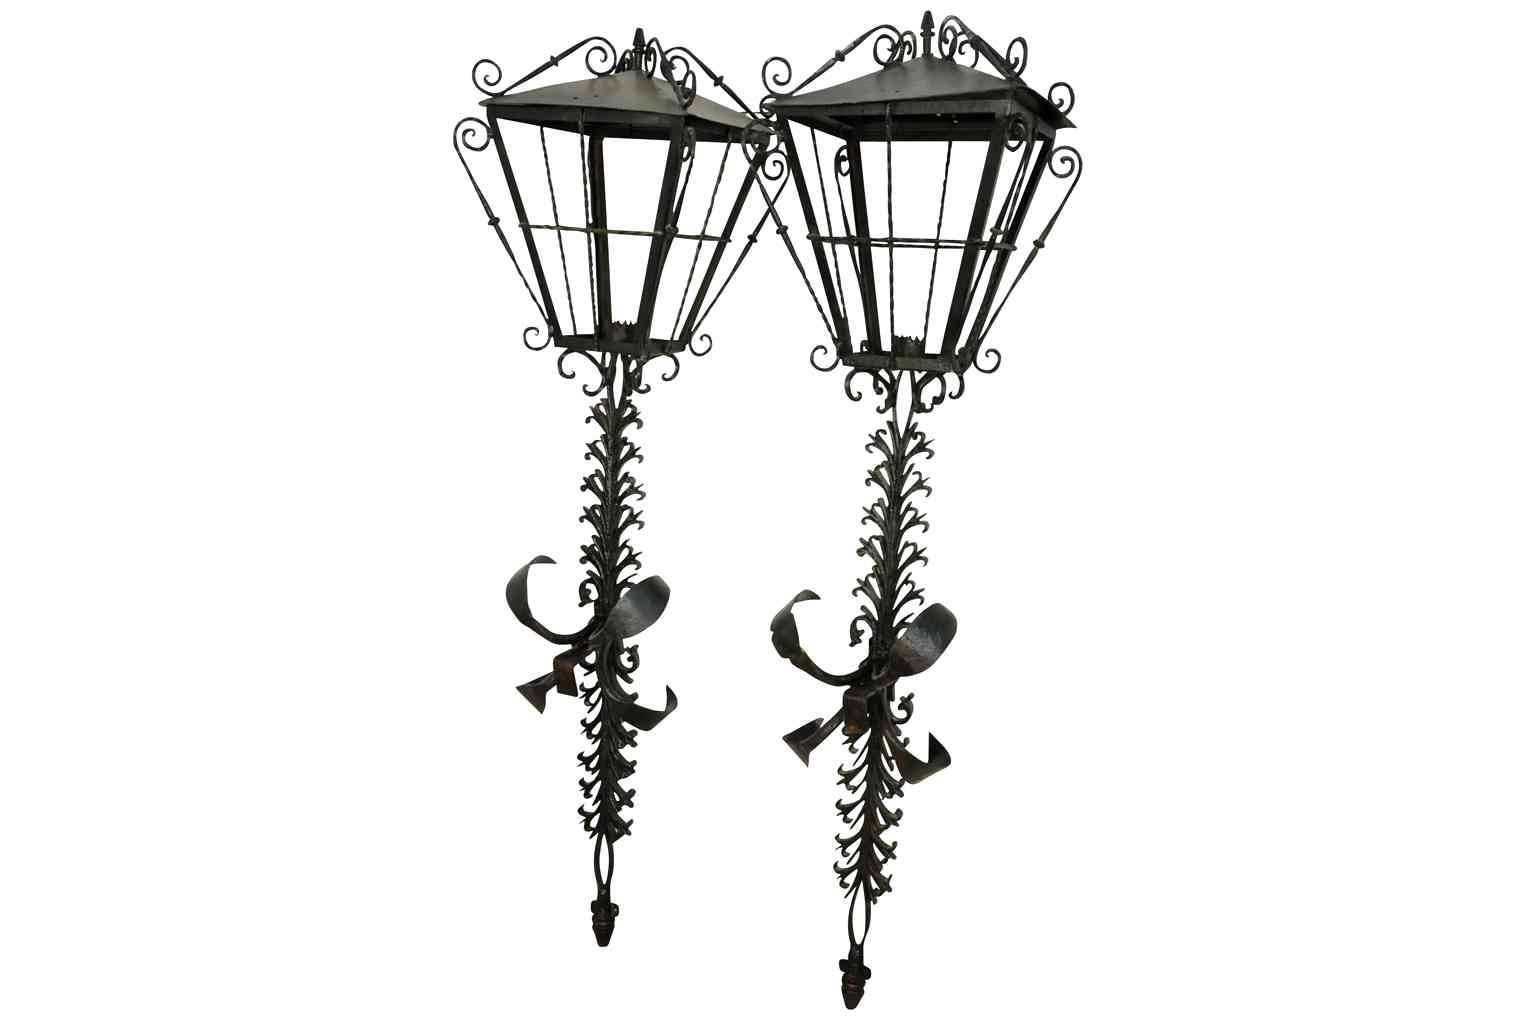 A fabulous grand pair of iron lanterns from the Catalan region of Spain. Excellent craftsmanship. A definite statement to any entryway.